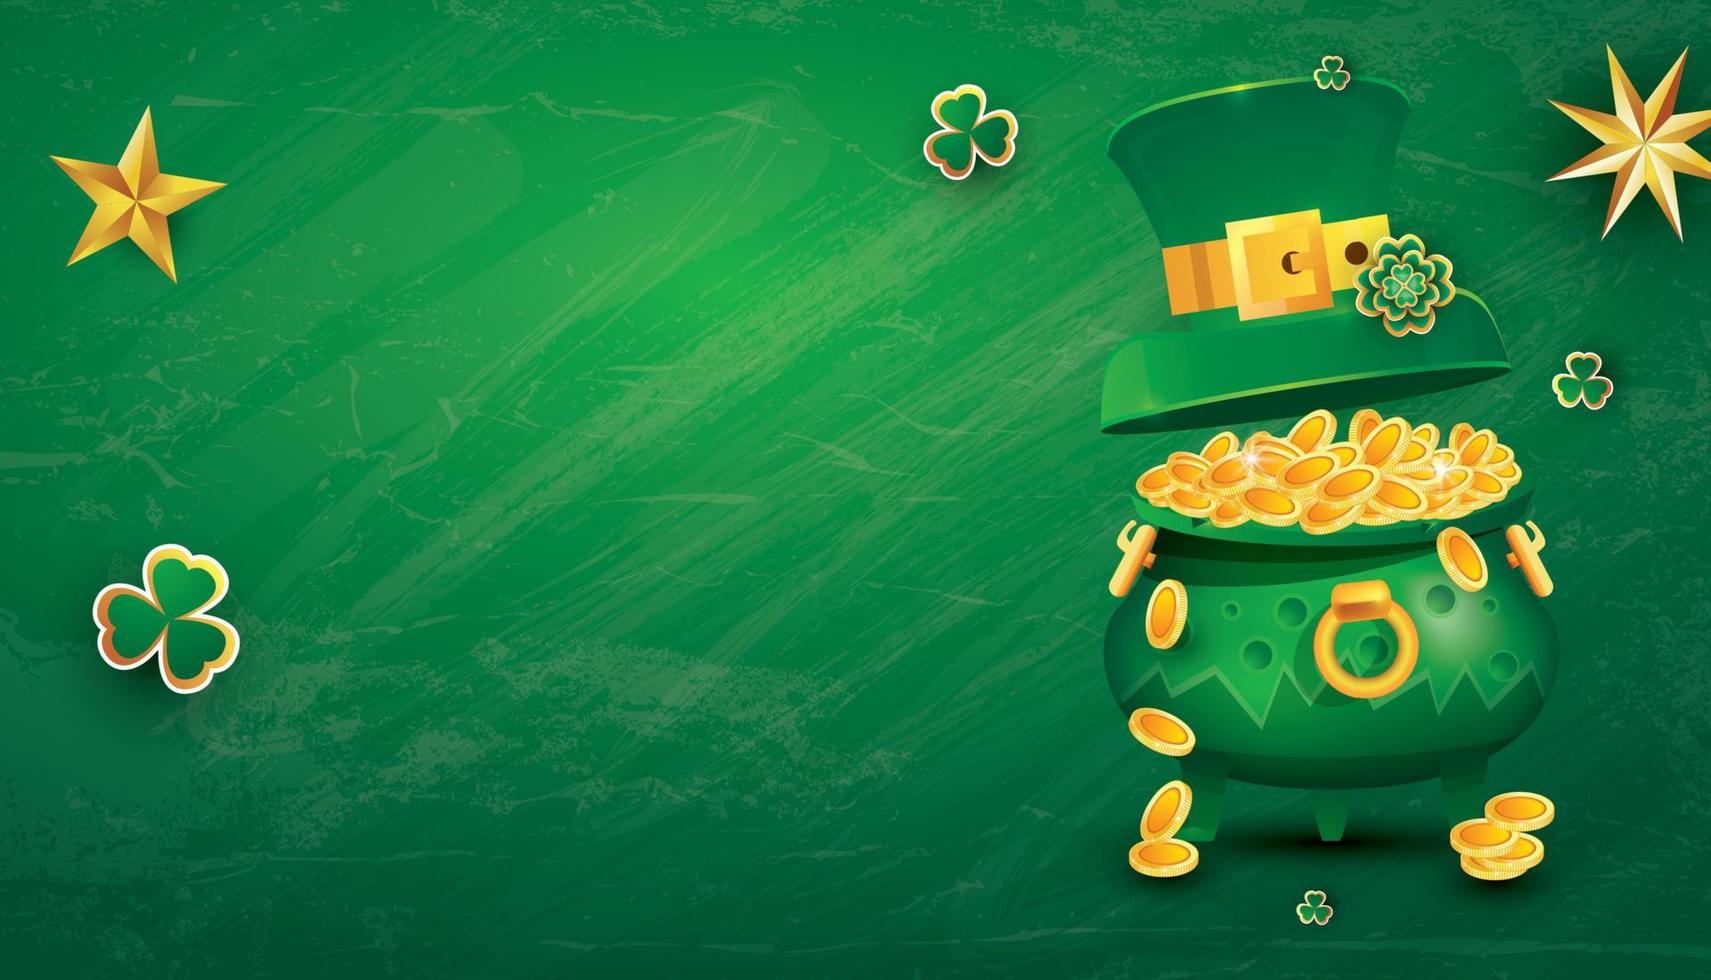 Saint Patricks Day Festive Banner with Pot Filled Golden Coins, Green Top Hat and Shamrock. vector